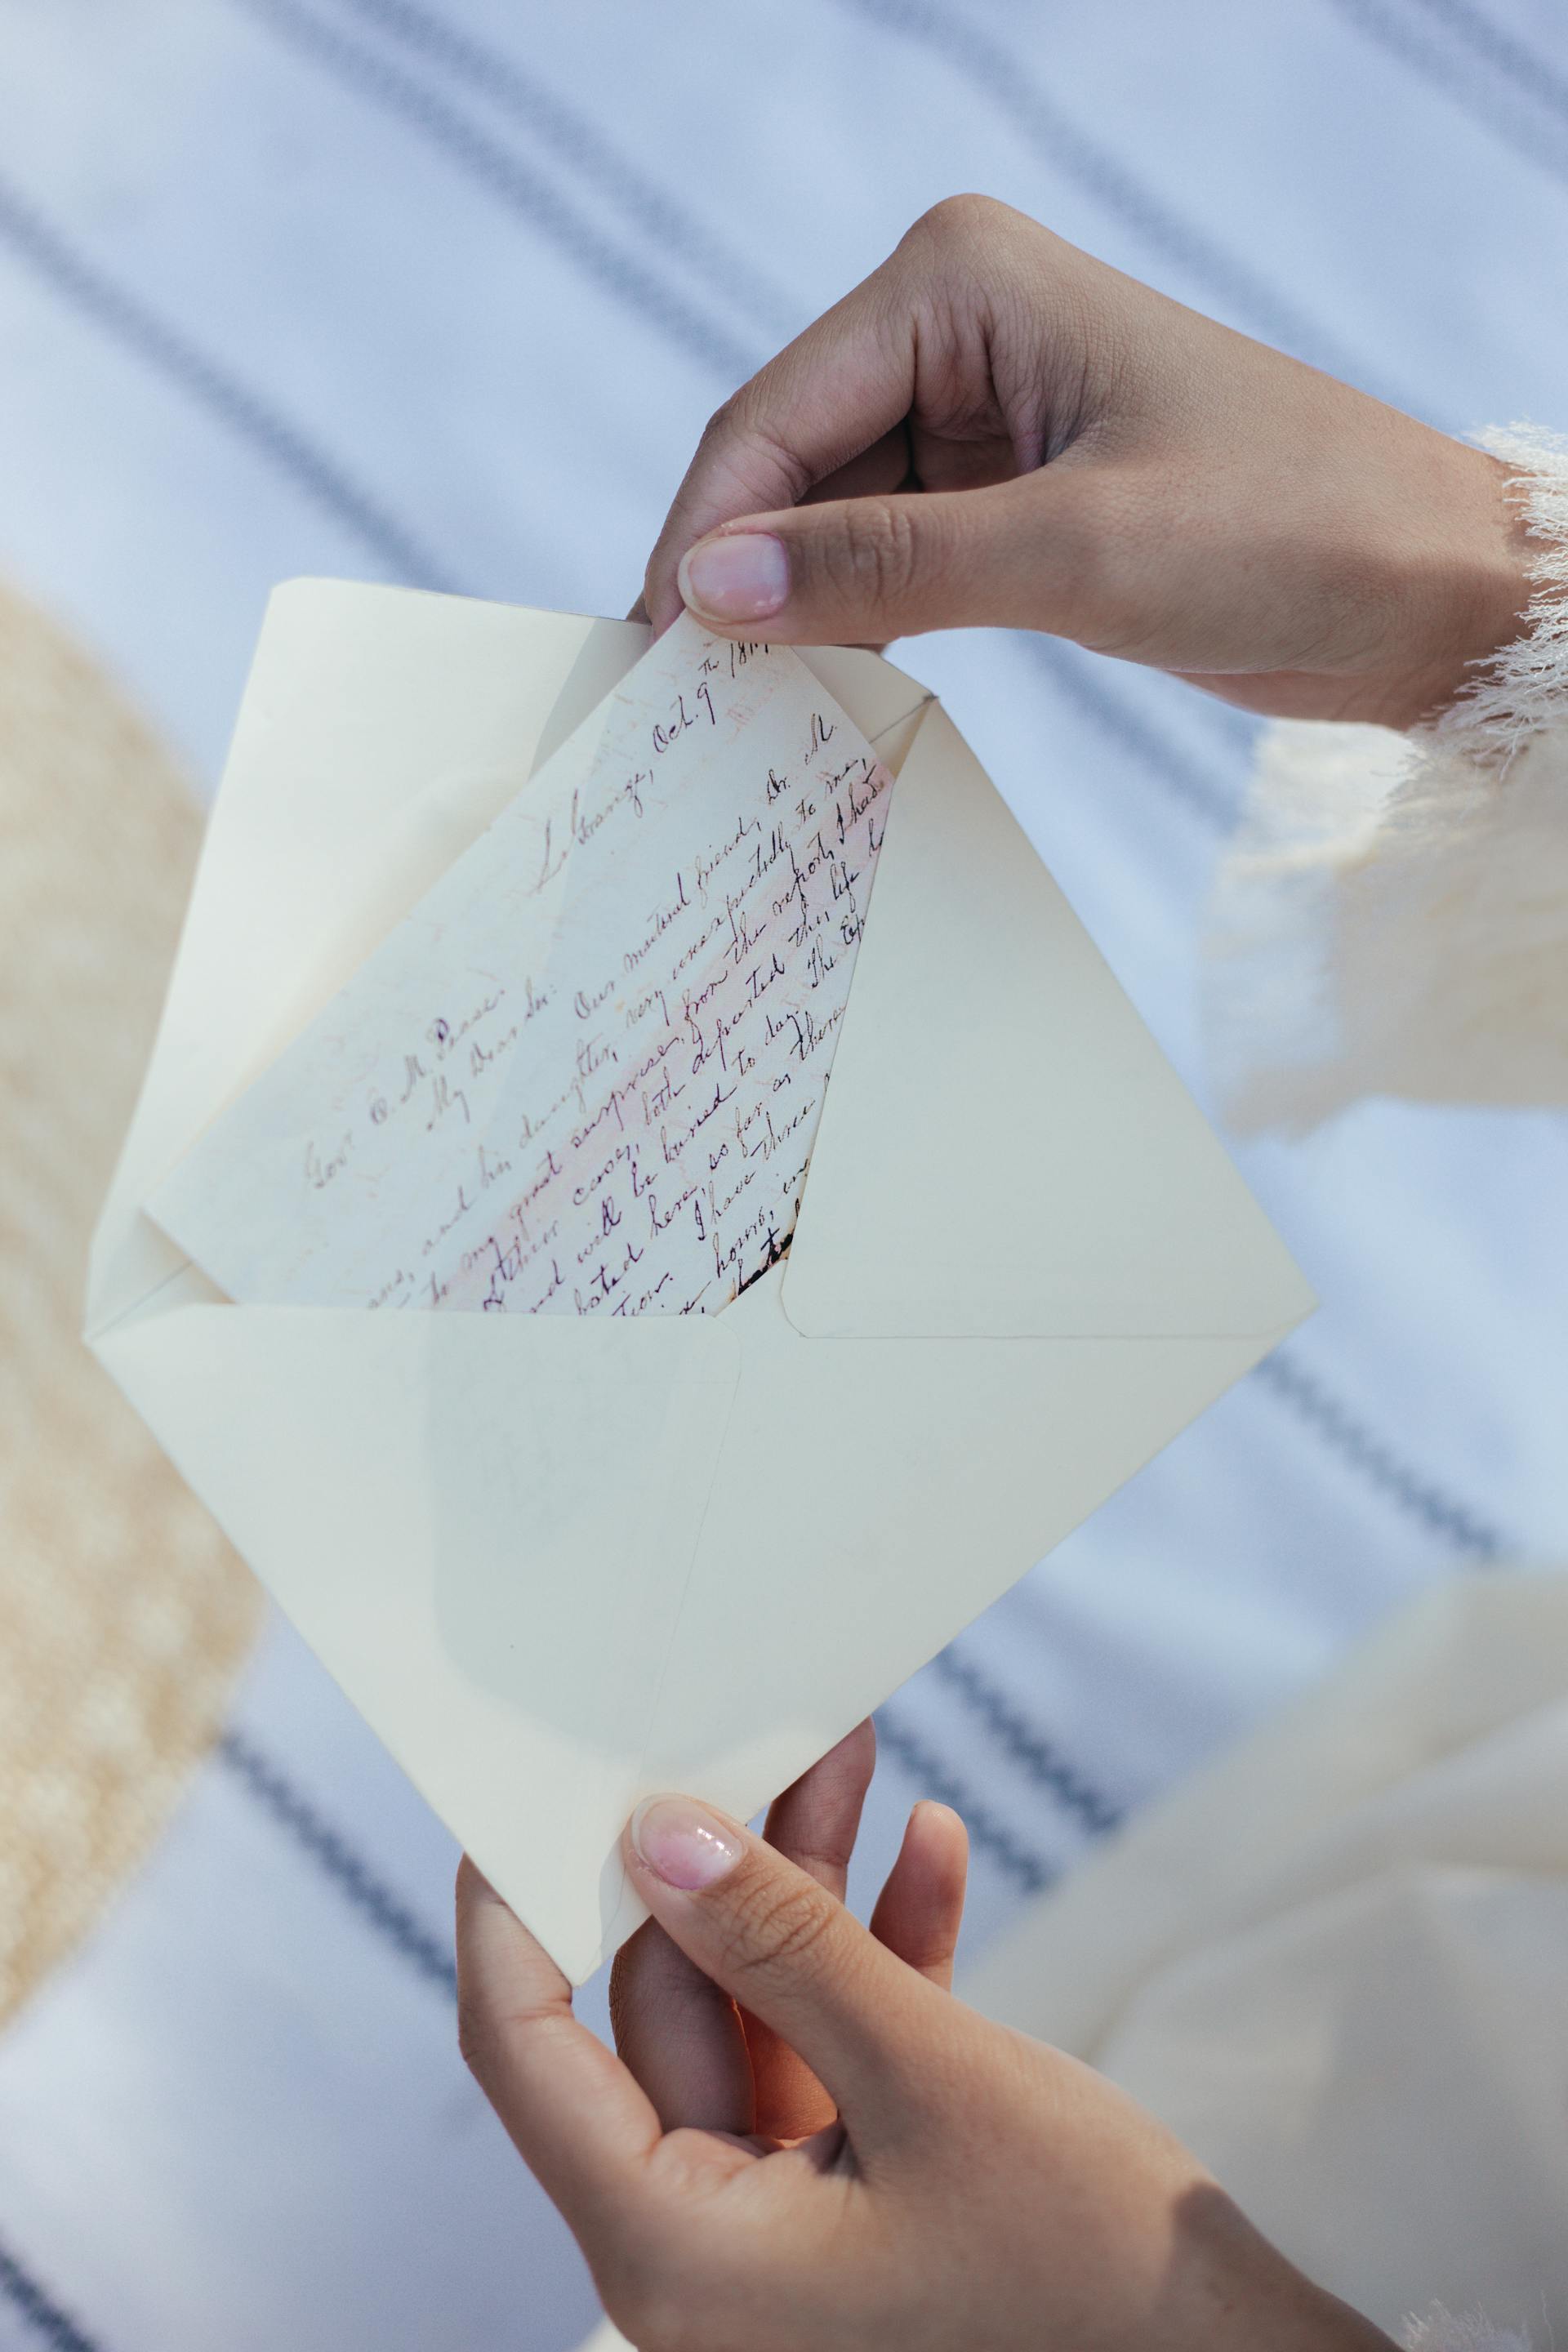 A person holding an envelope | Source: Pexels